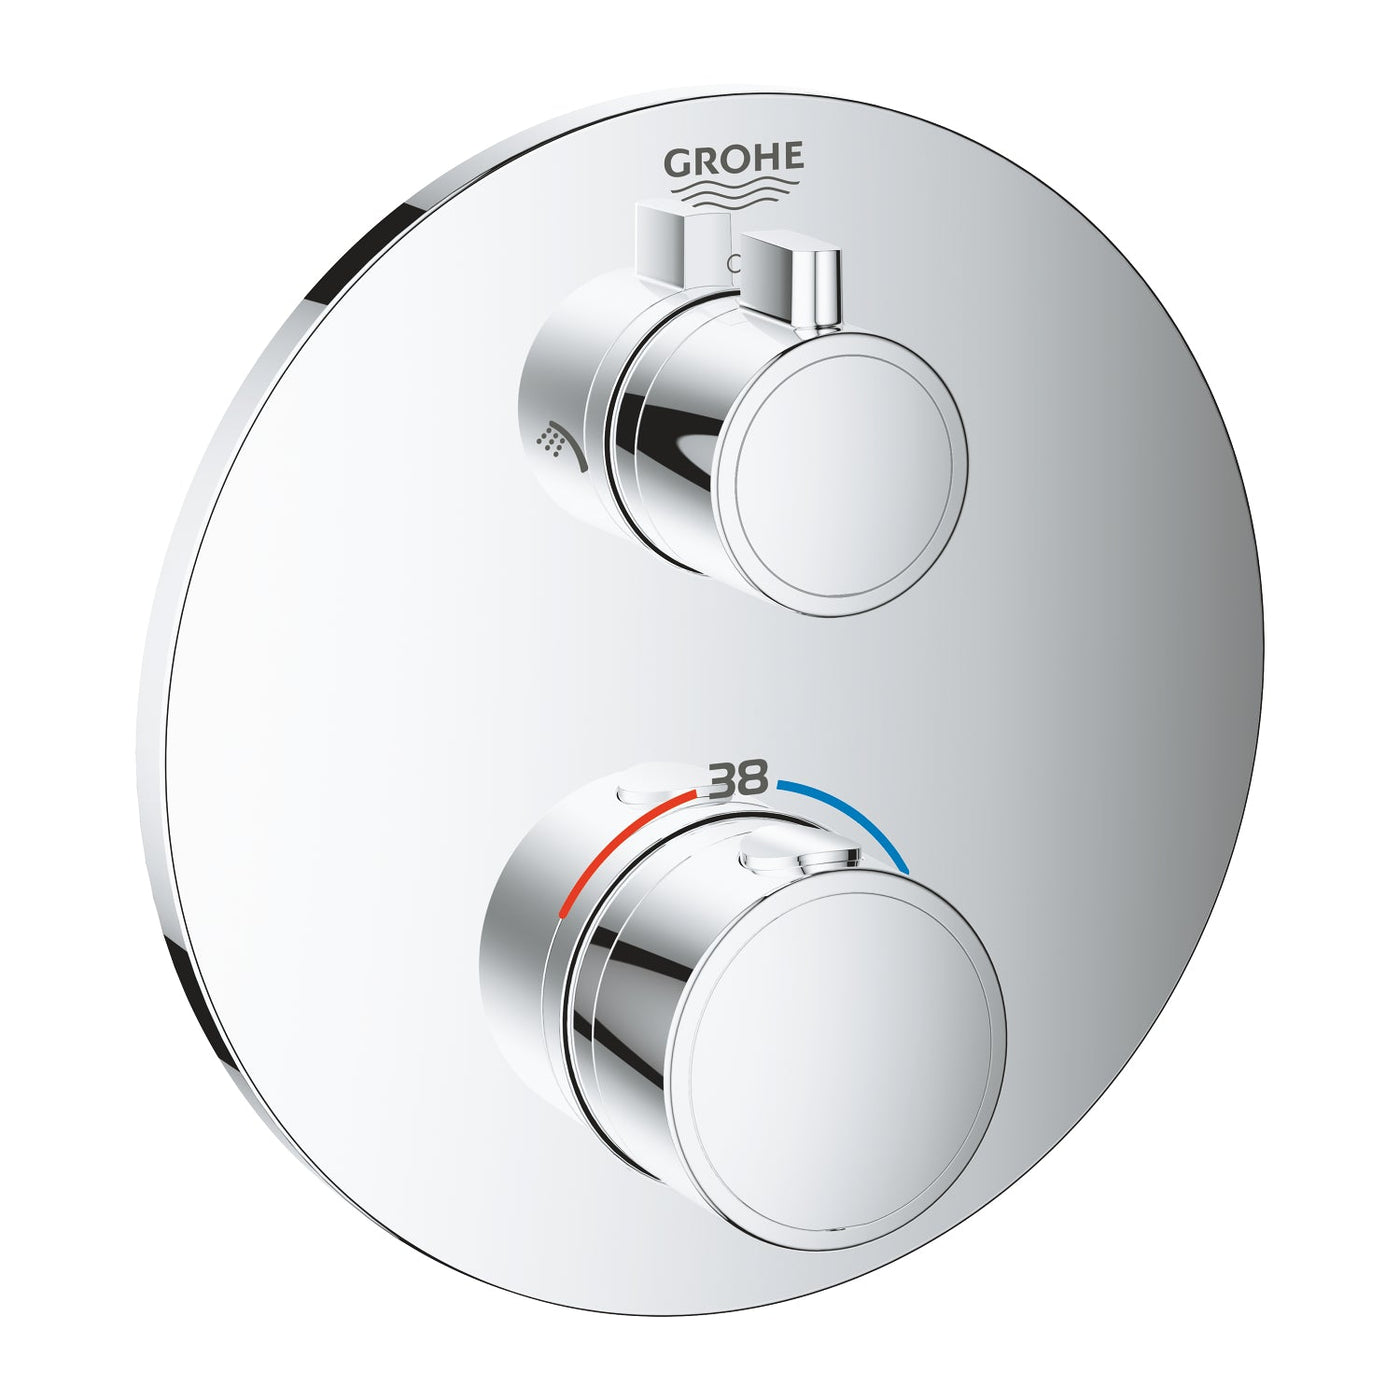 Grohe Chrome Grohtherm Thermostatic shower mixer for 2 outlets with integrated shut off/diverter valve - Letta London - Twin Valves With Diverter